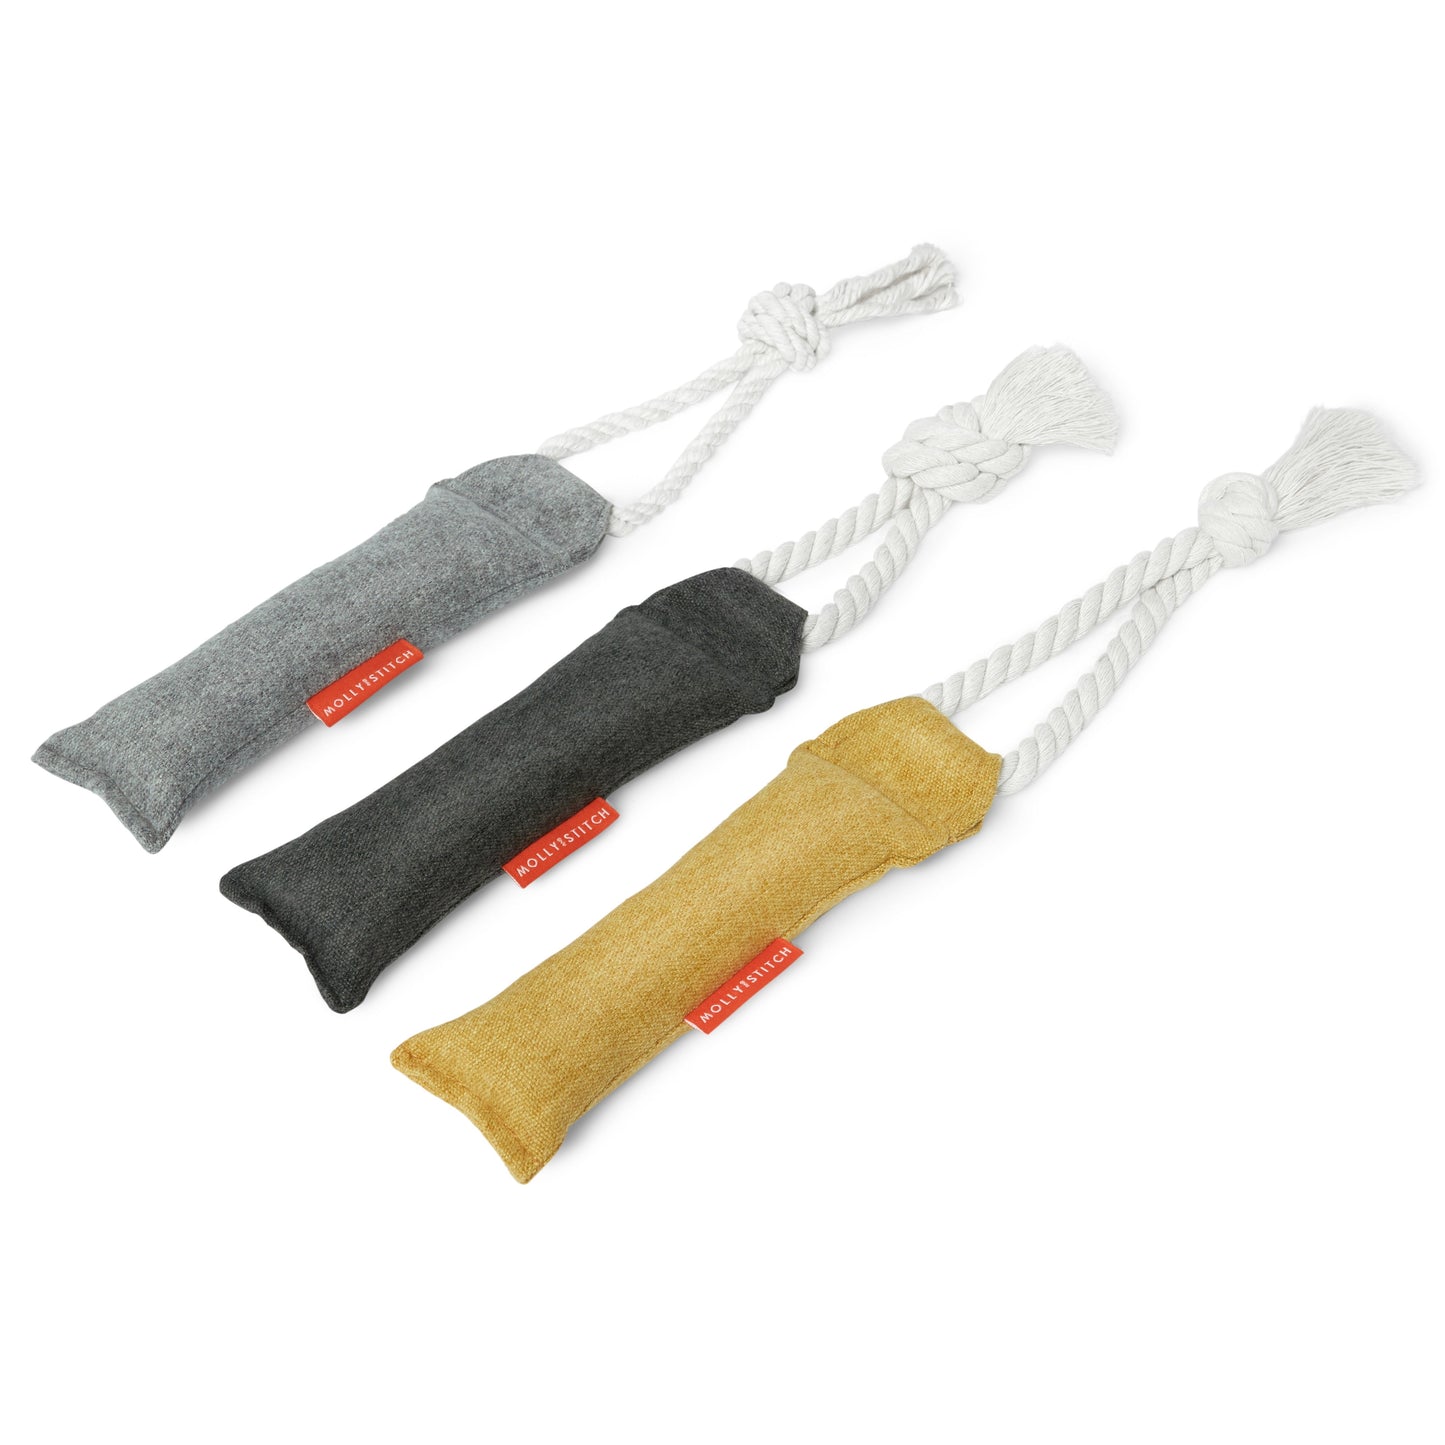 slate bumper tug toy with rope from molly and stitch three colors